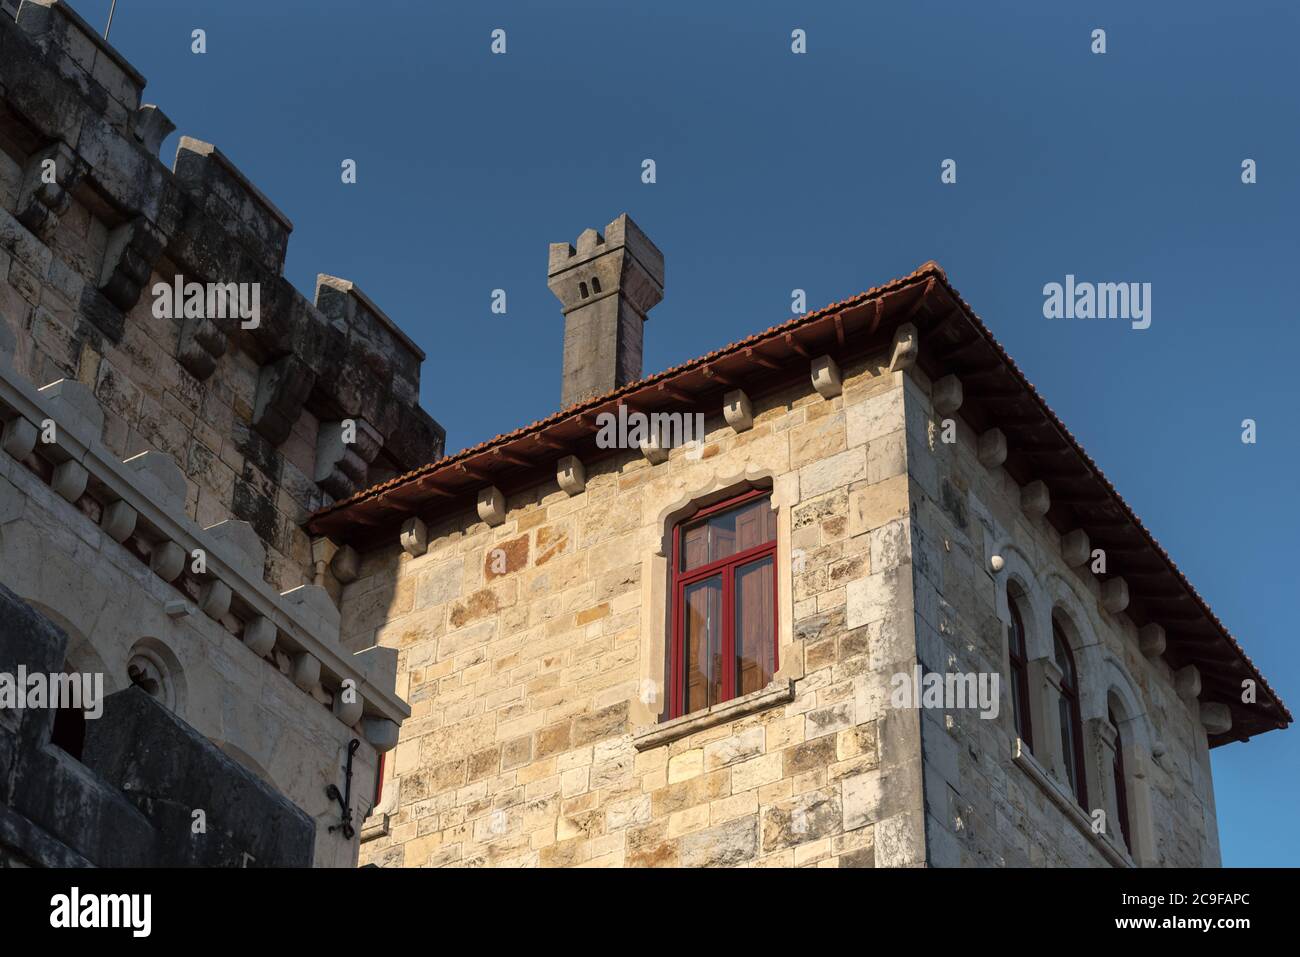 Architectural detail of faux castle mansion house building of stone blocks by the seaside on boardwalk in Estoril, Portugal Stock Photo